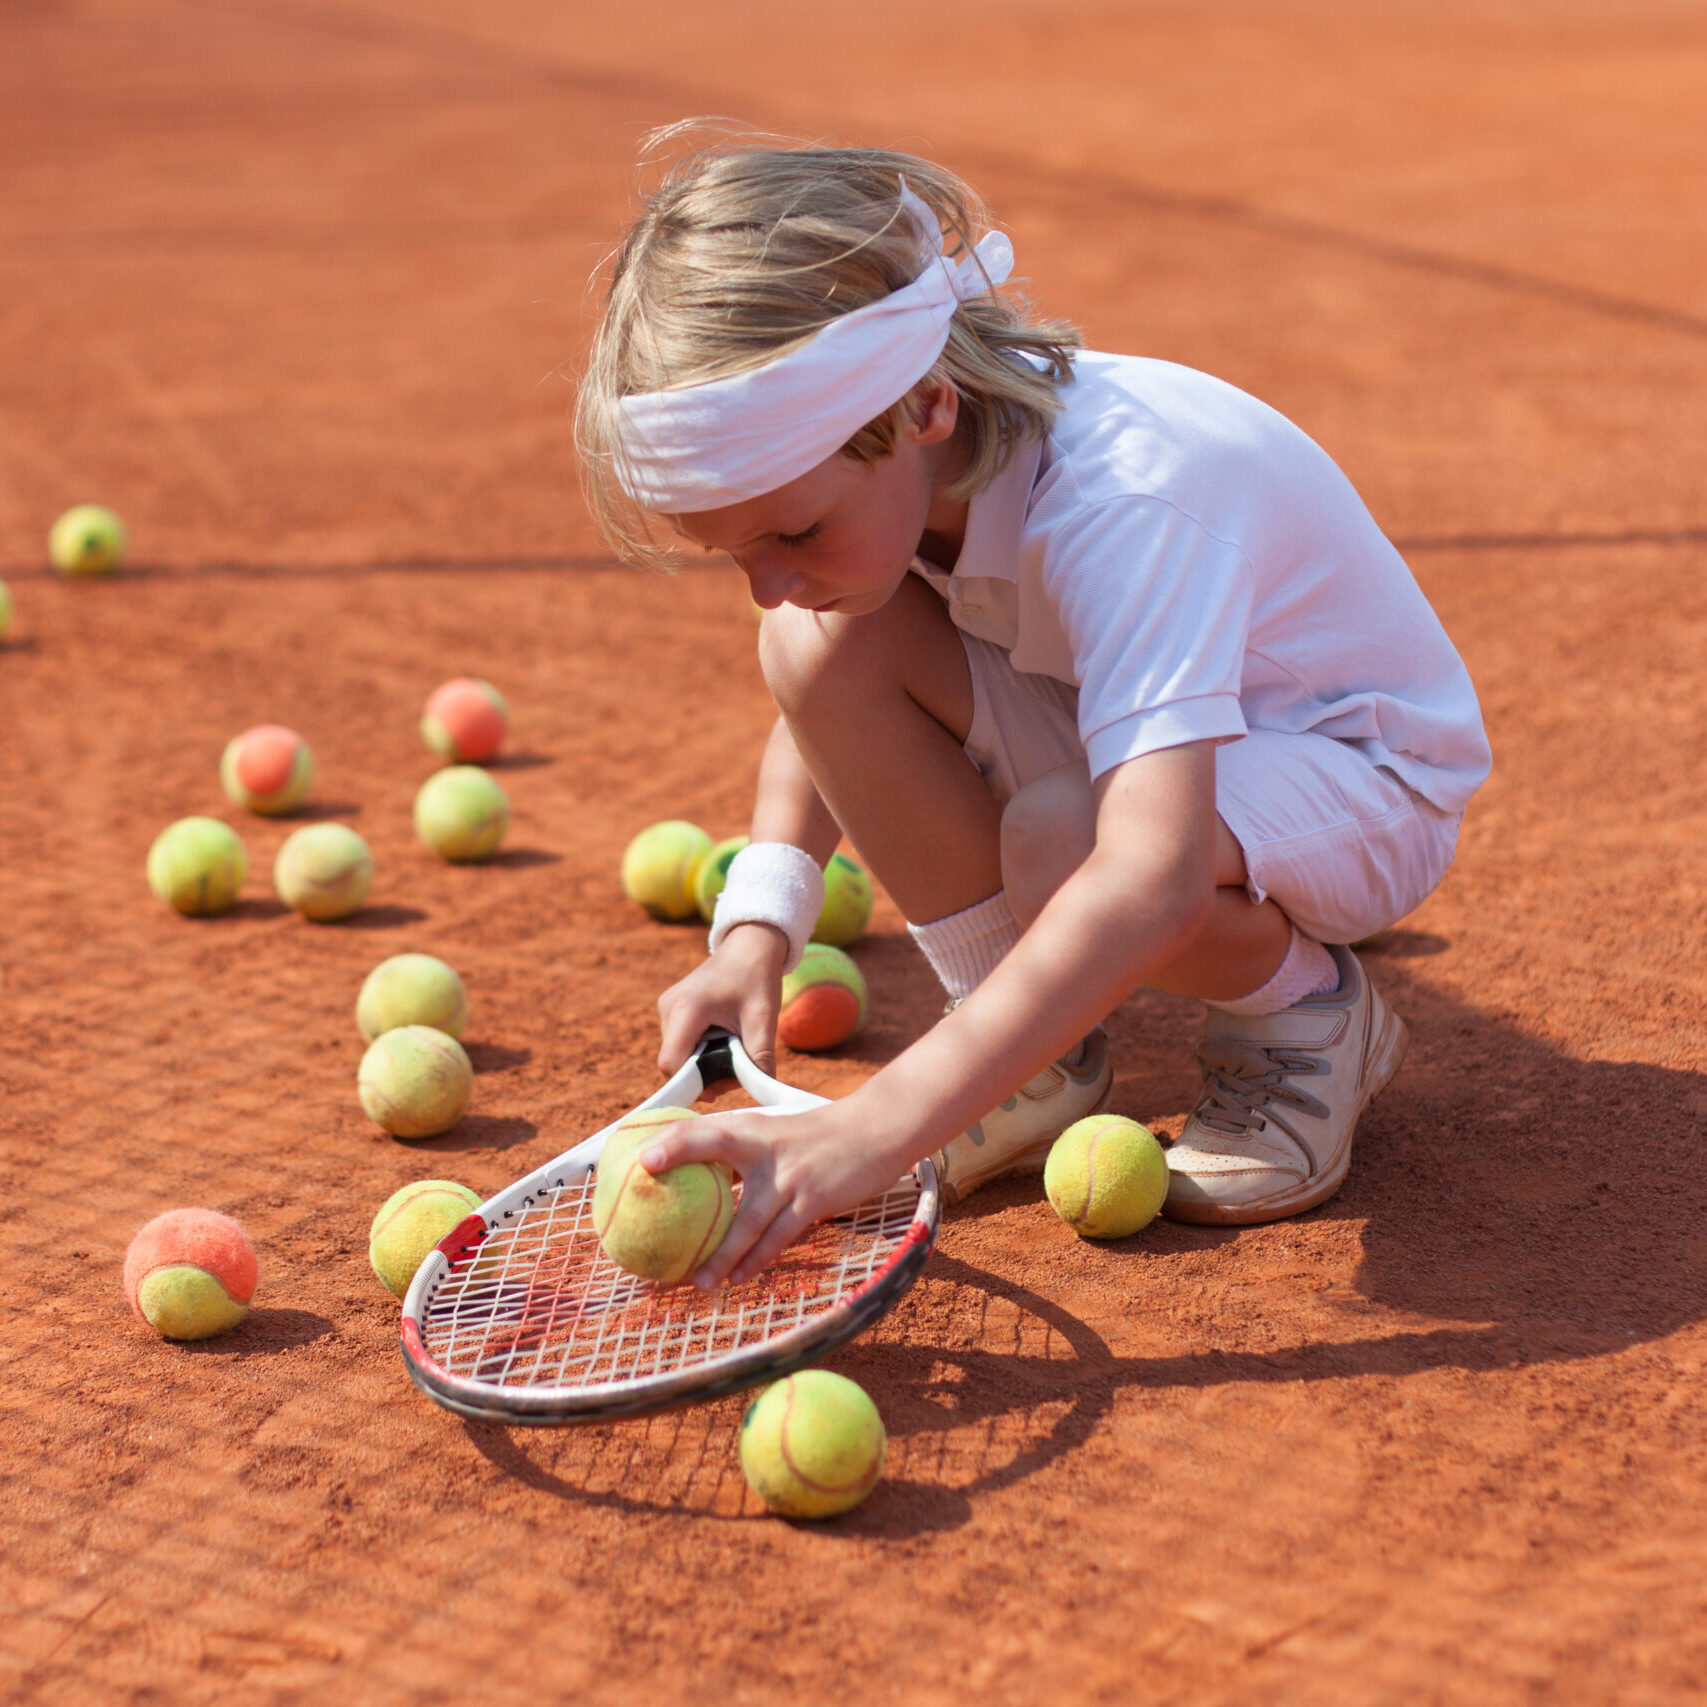 young tennis player collecting balls